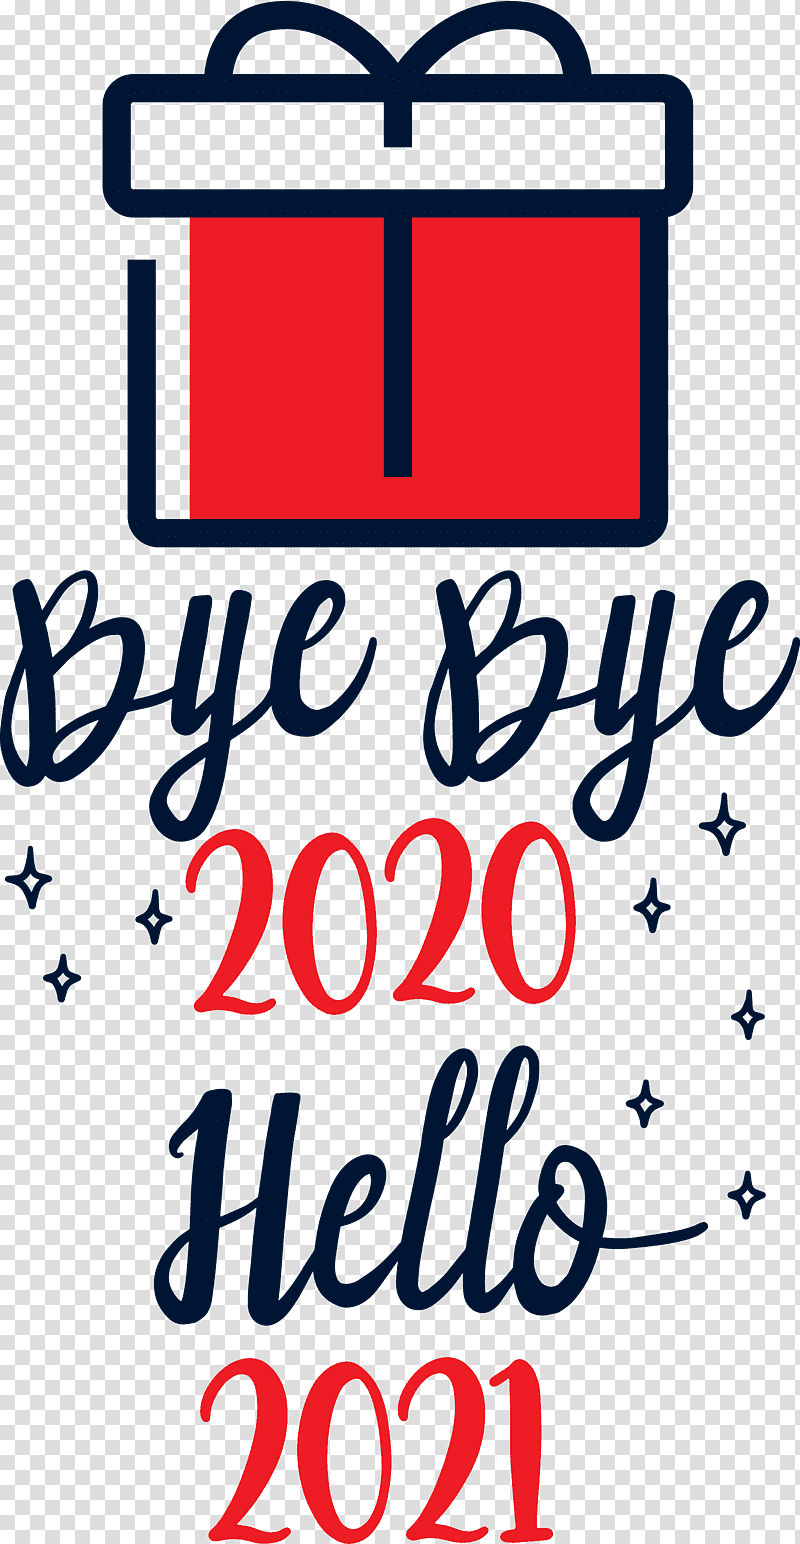 Hello 2021 Year Bye bye 2020 Year, Christmas Day, Abstract Art, New Year, Fireworks, Line Art, Ornament transparent background PNG clipart